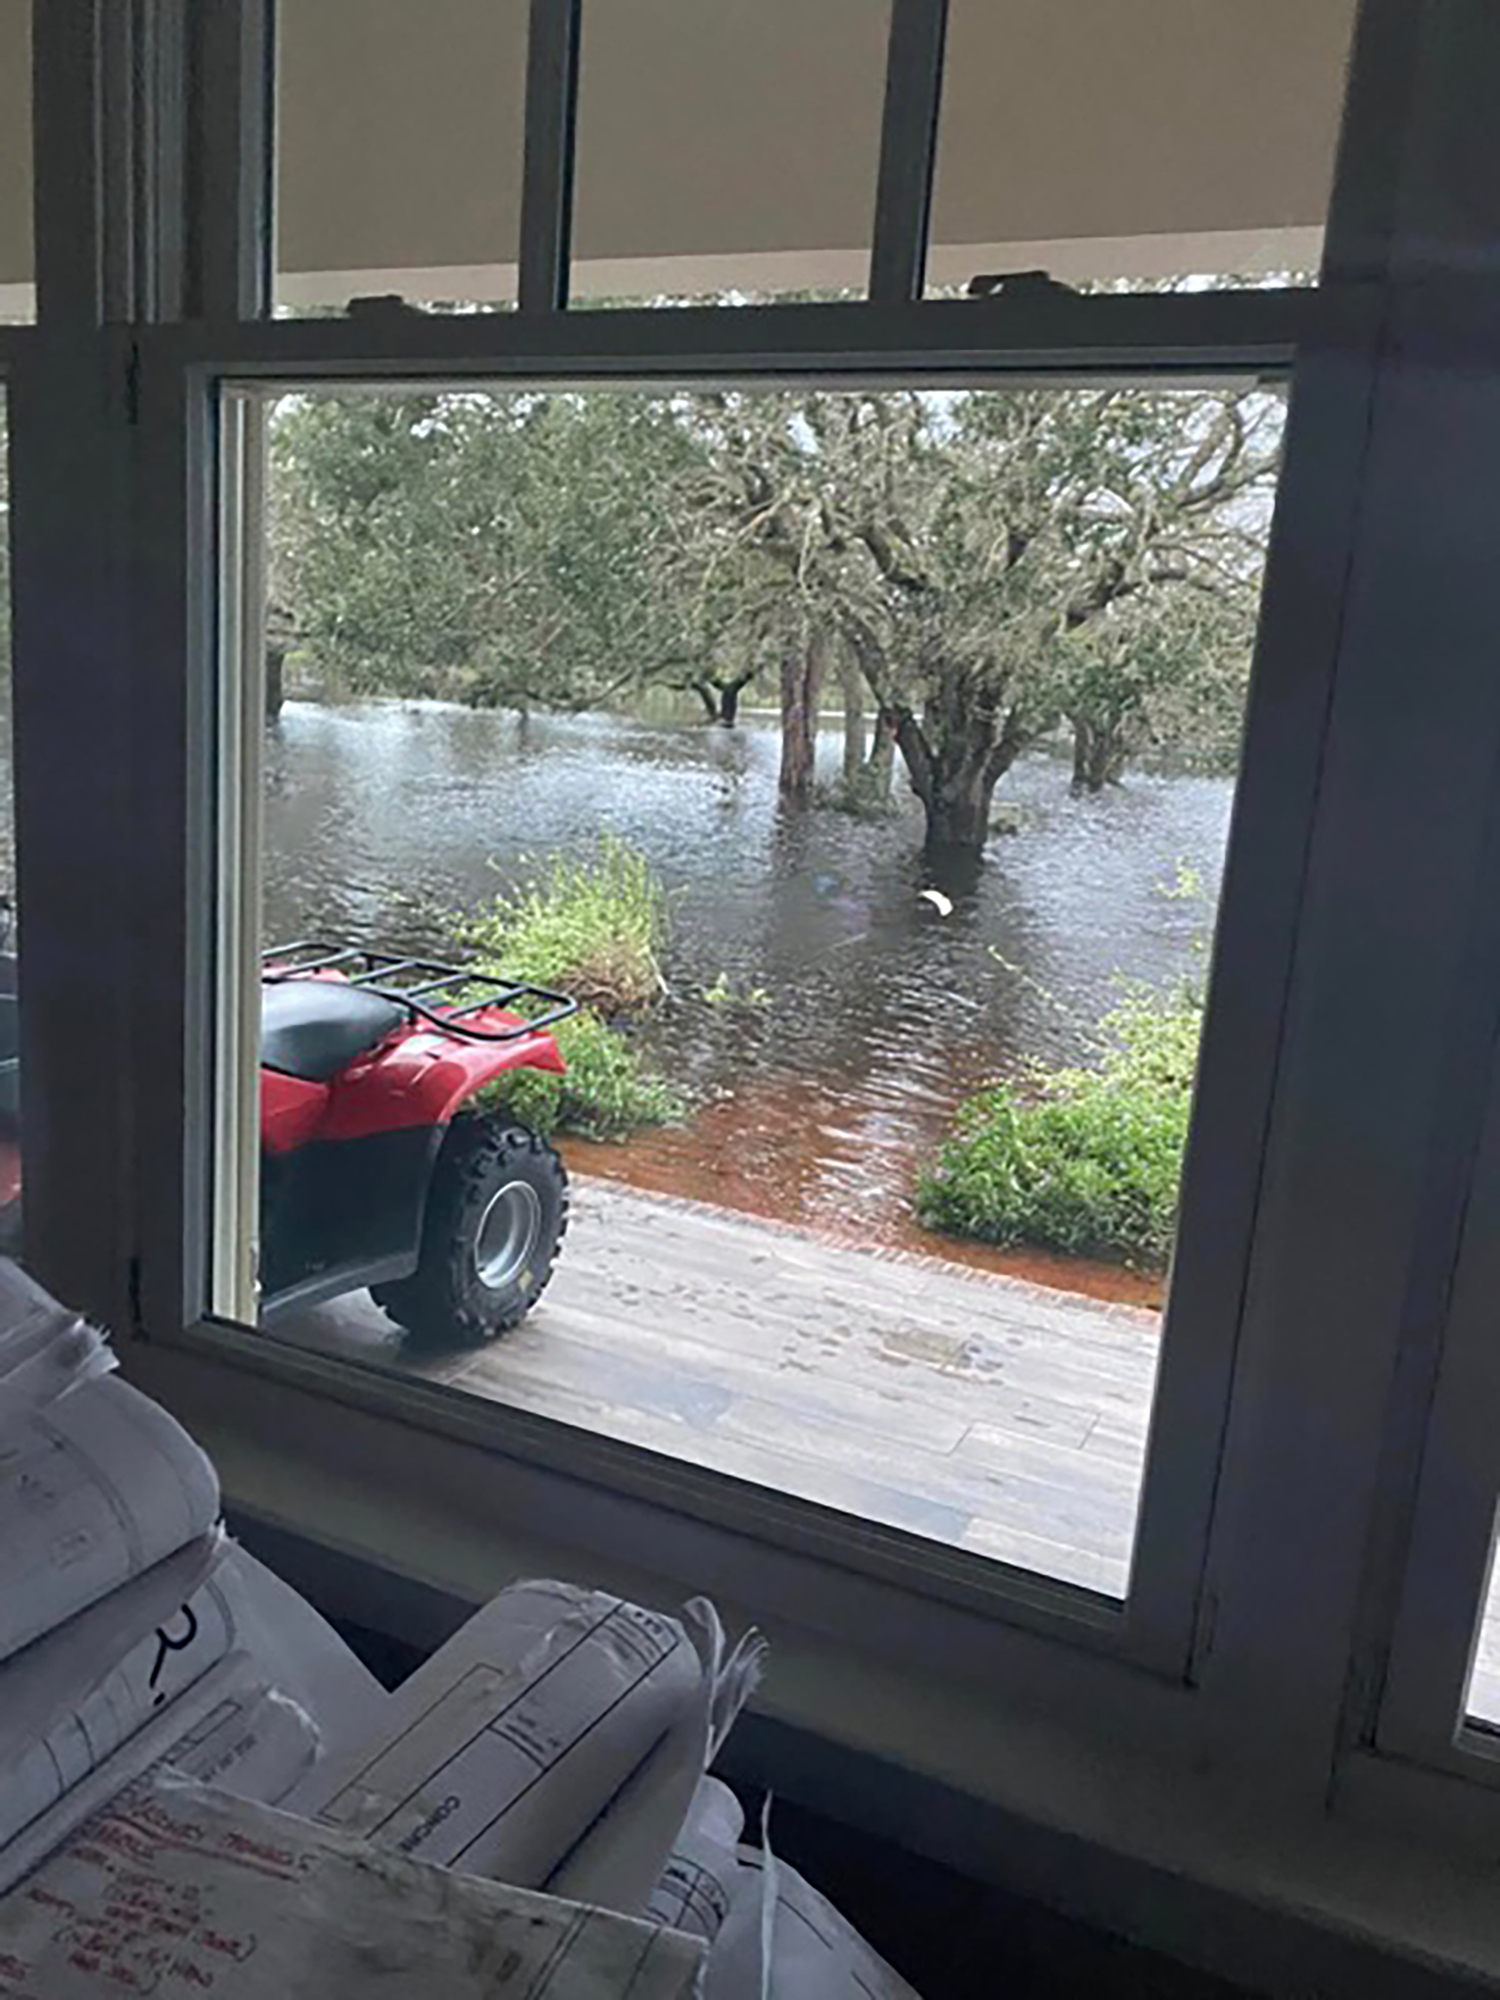 The water nears Rose and Clyde Alstrom's Myakka City home during Hurricane Ian. Clyde Alstrom and his family were able to evacuate before the water entered the house. (Courtesy photo)